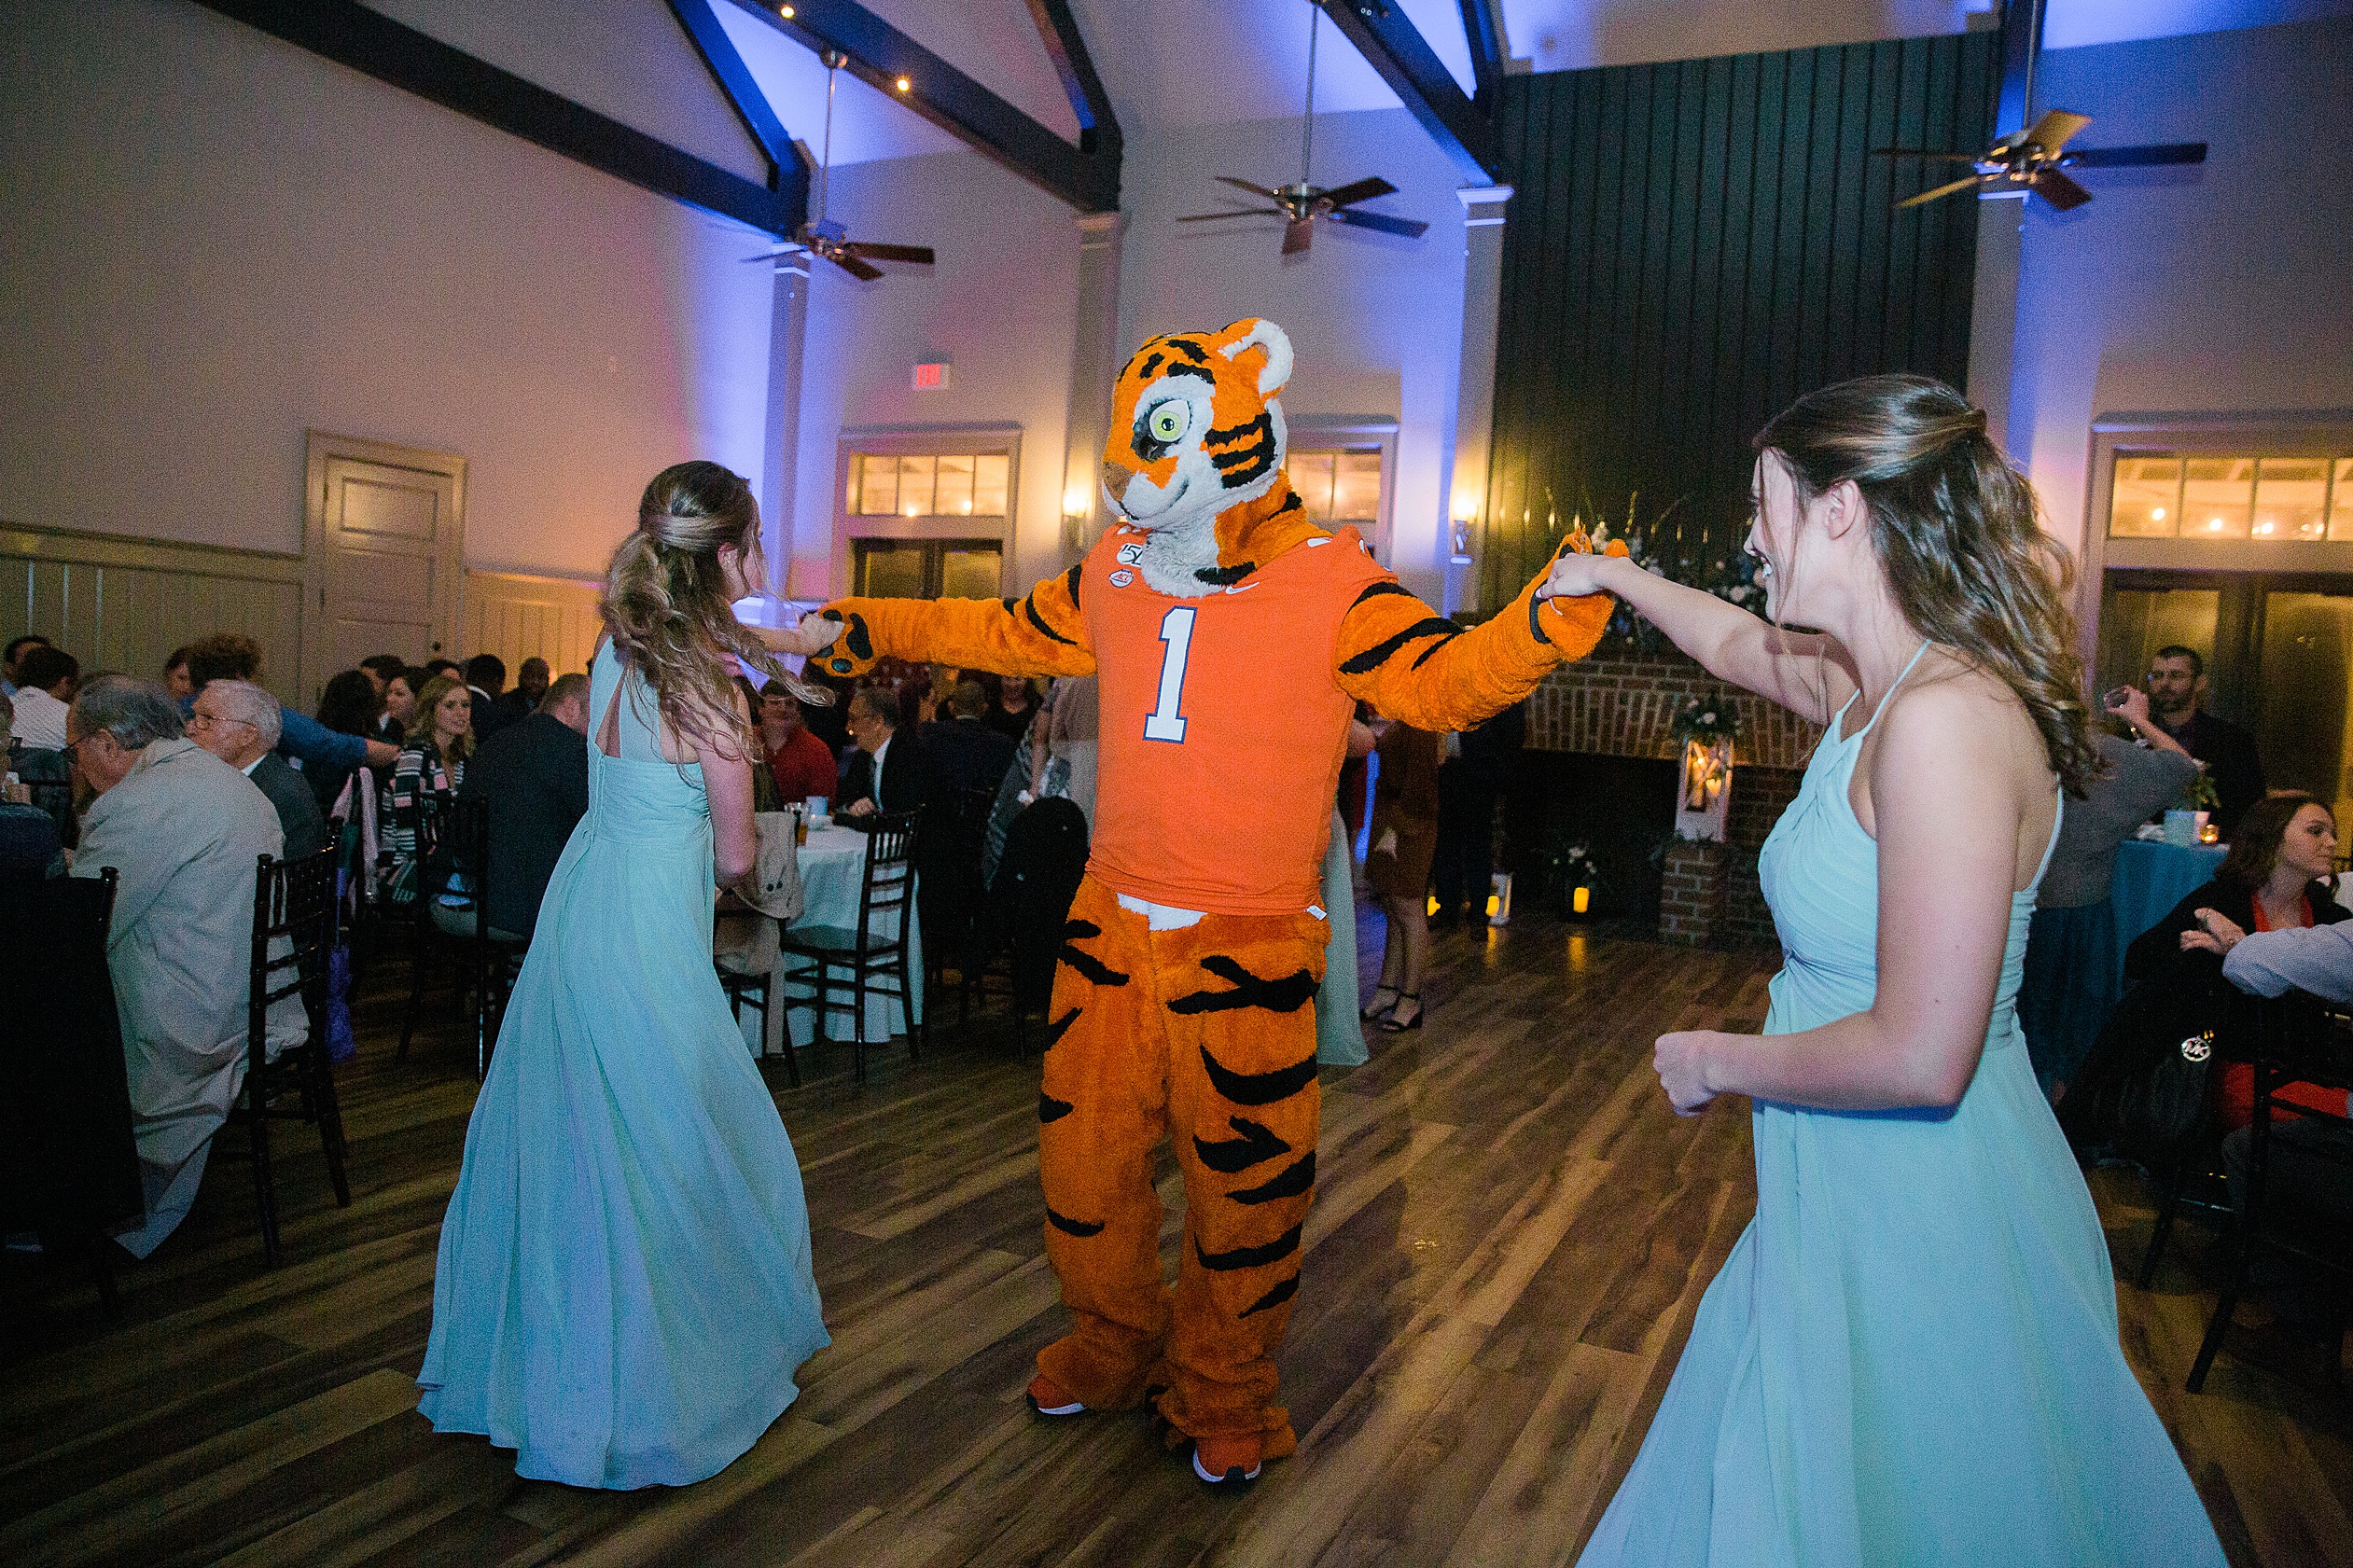 Clemson Tiger Mascot dancing with the Ladies